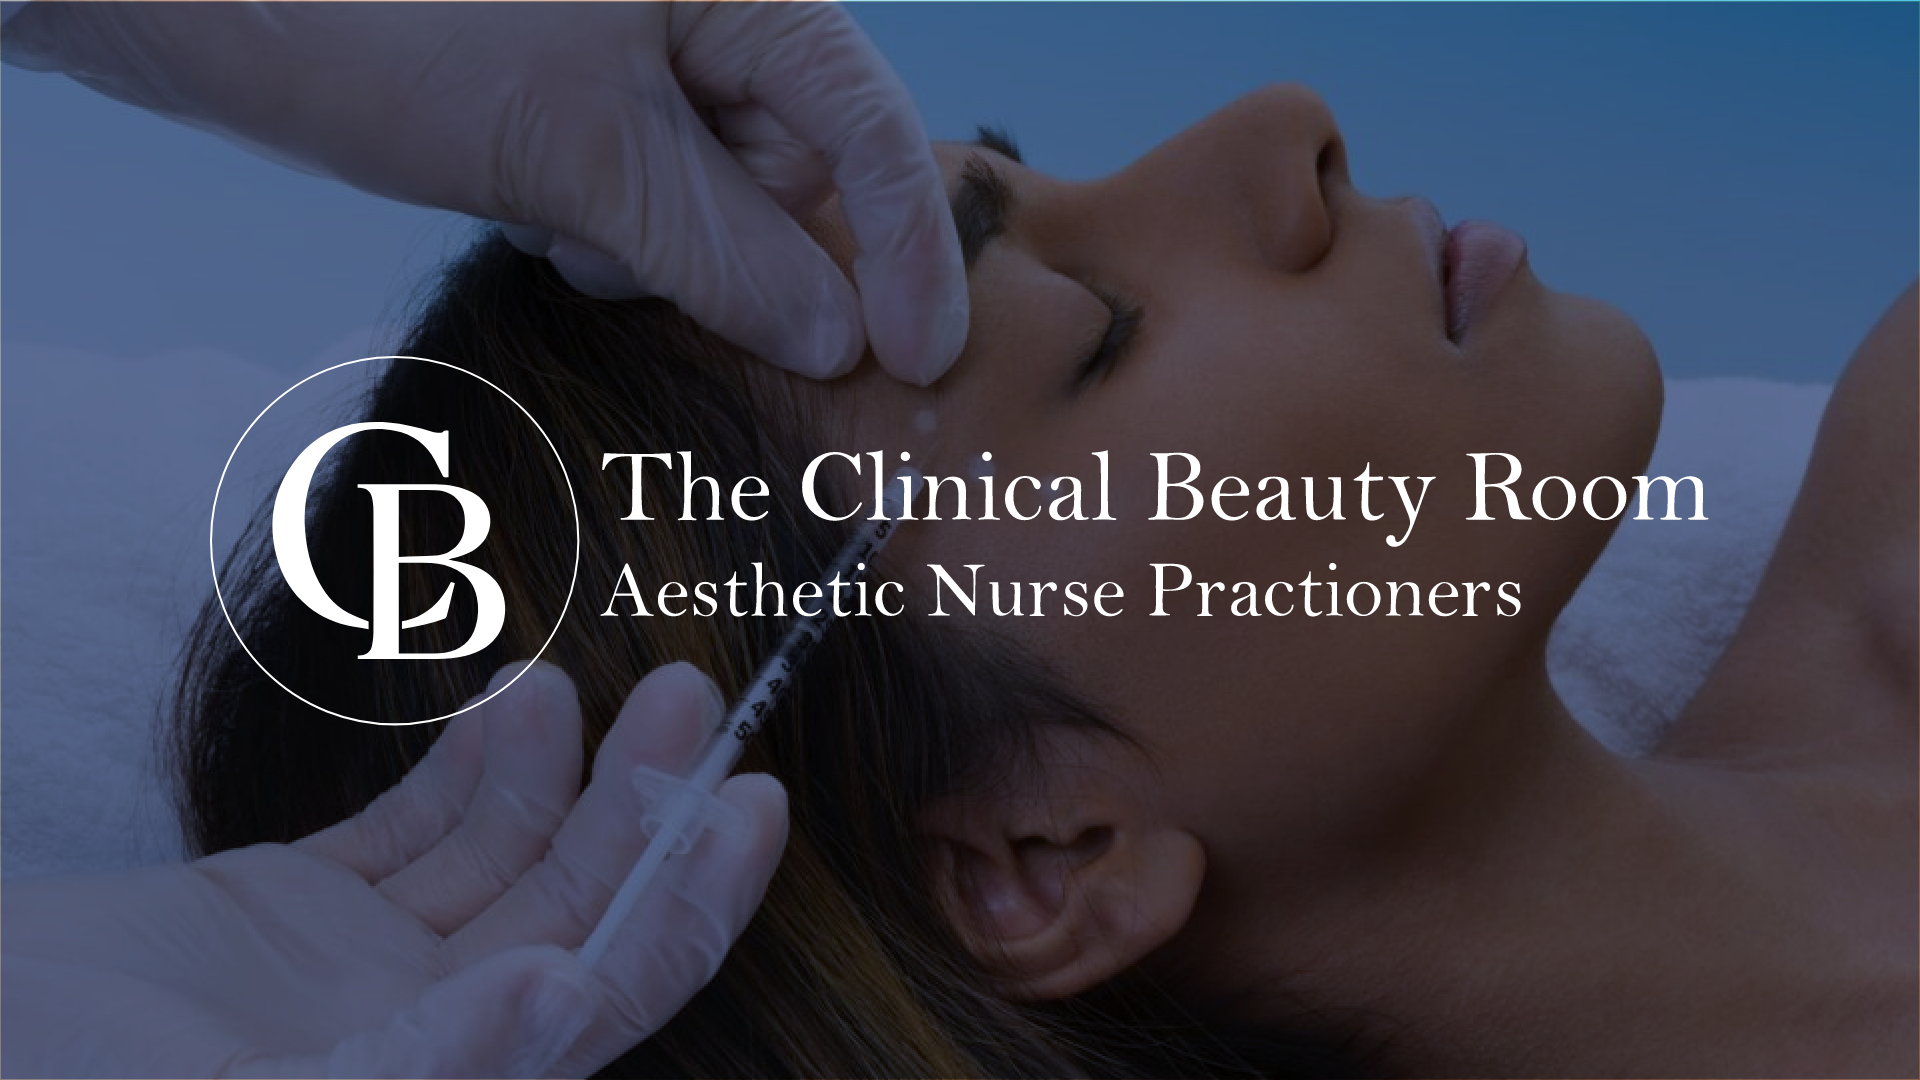 The Clinical Beauty Room